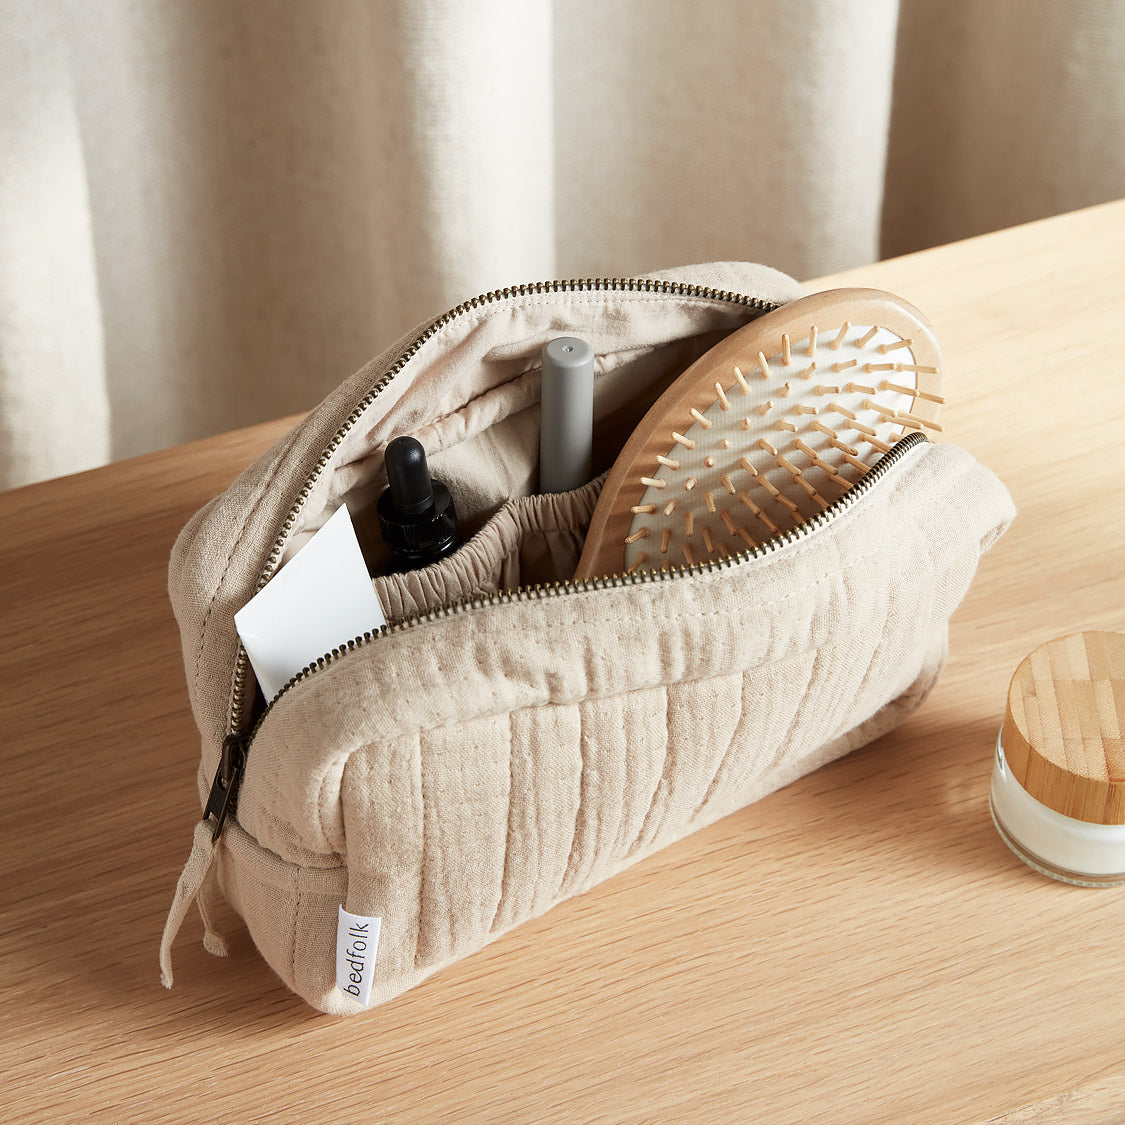 The Dream Cotton Make-Up Bag - Fawn